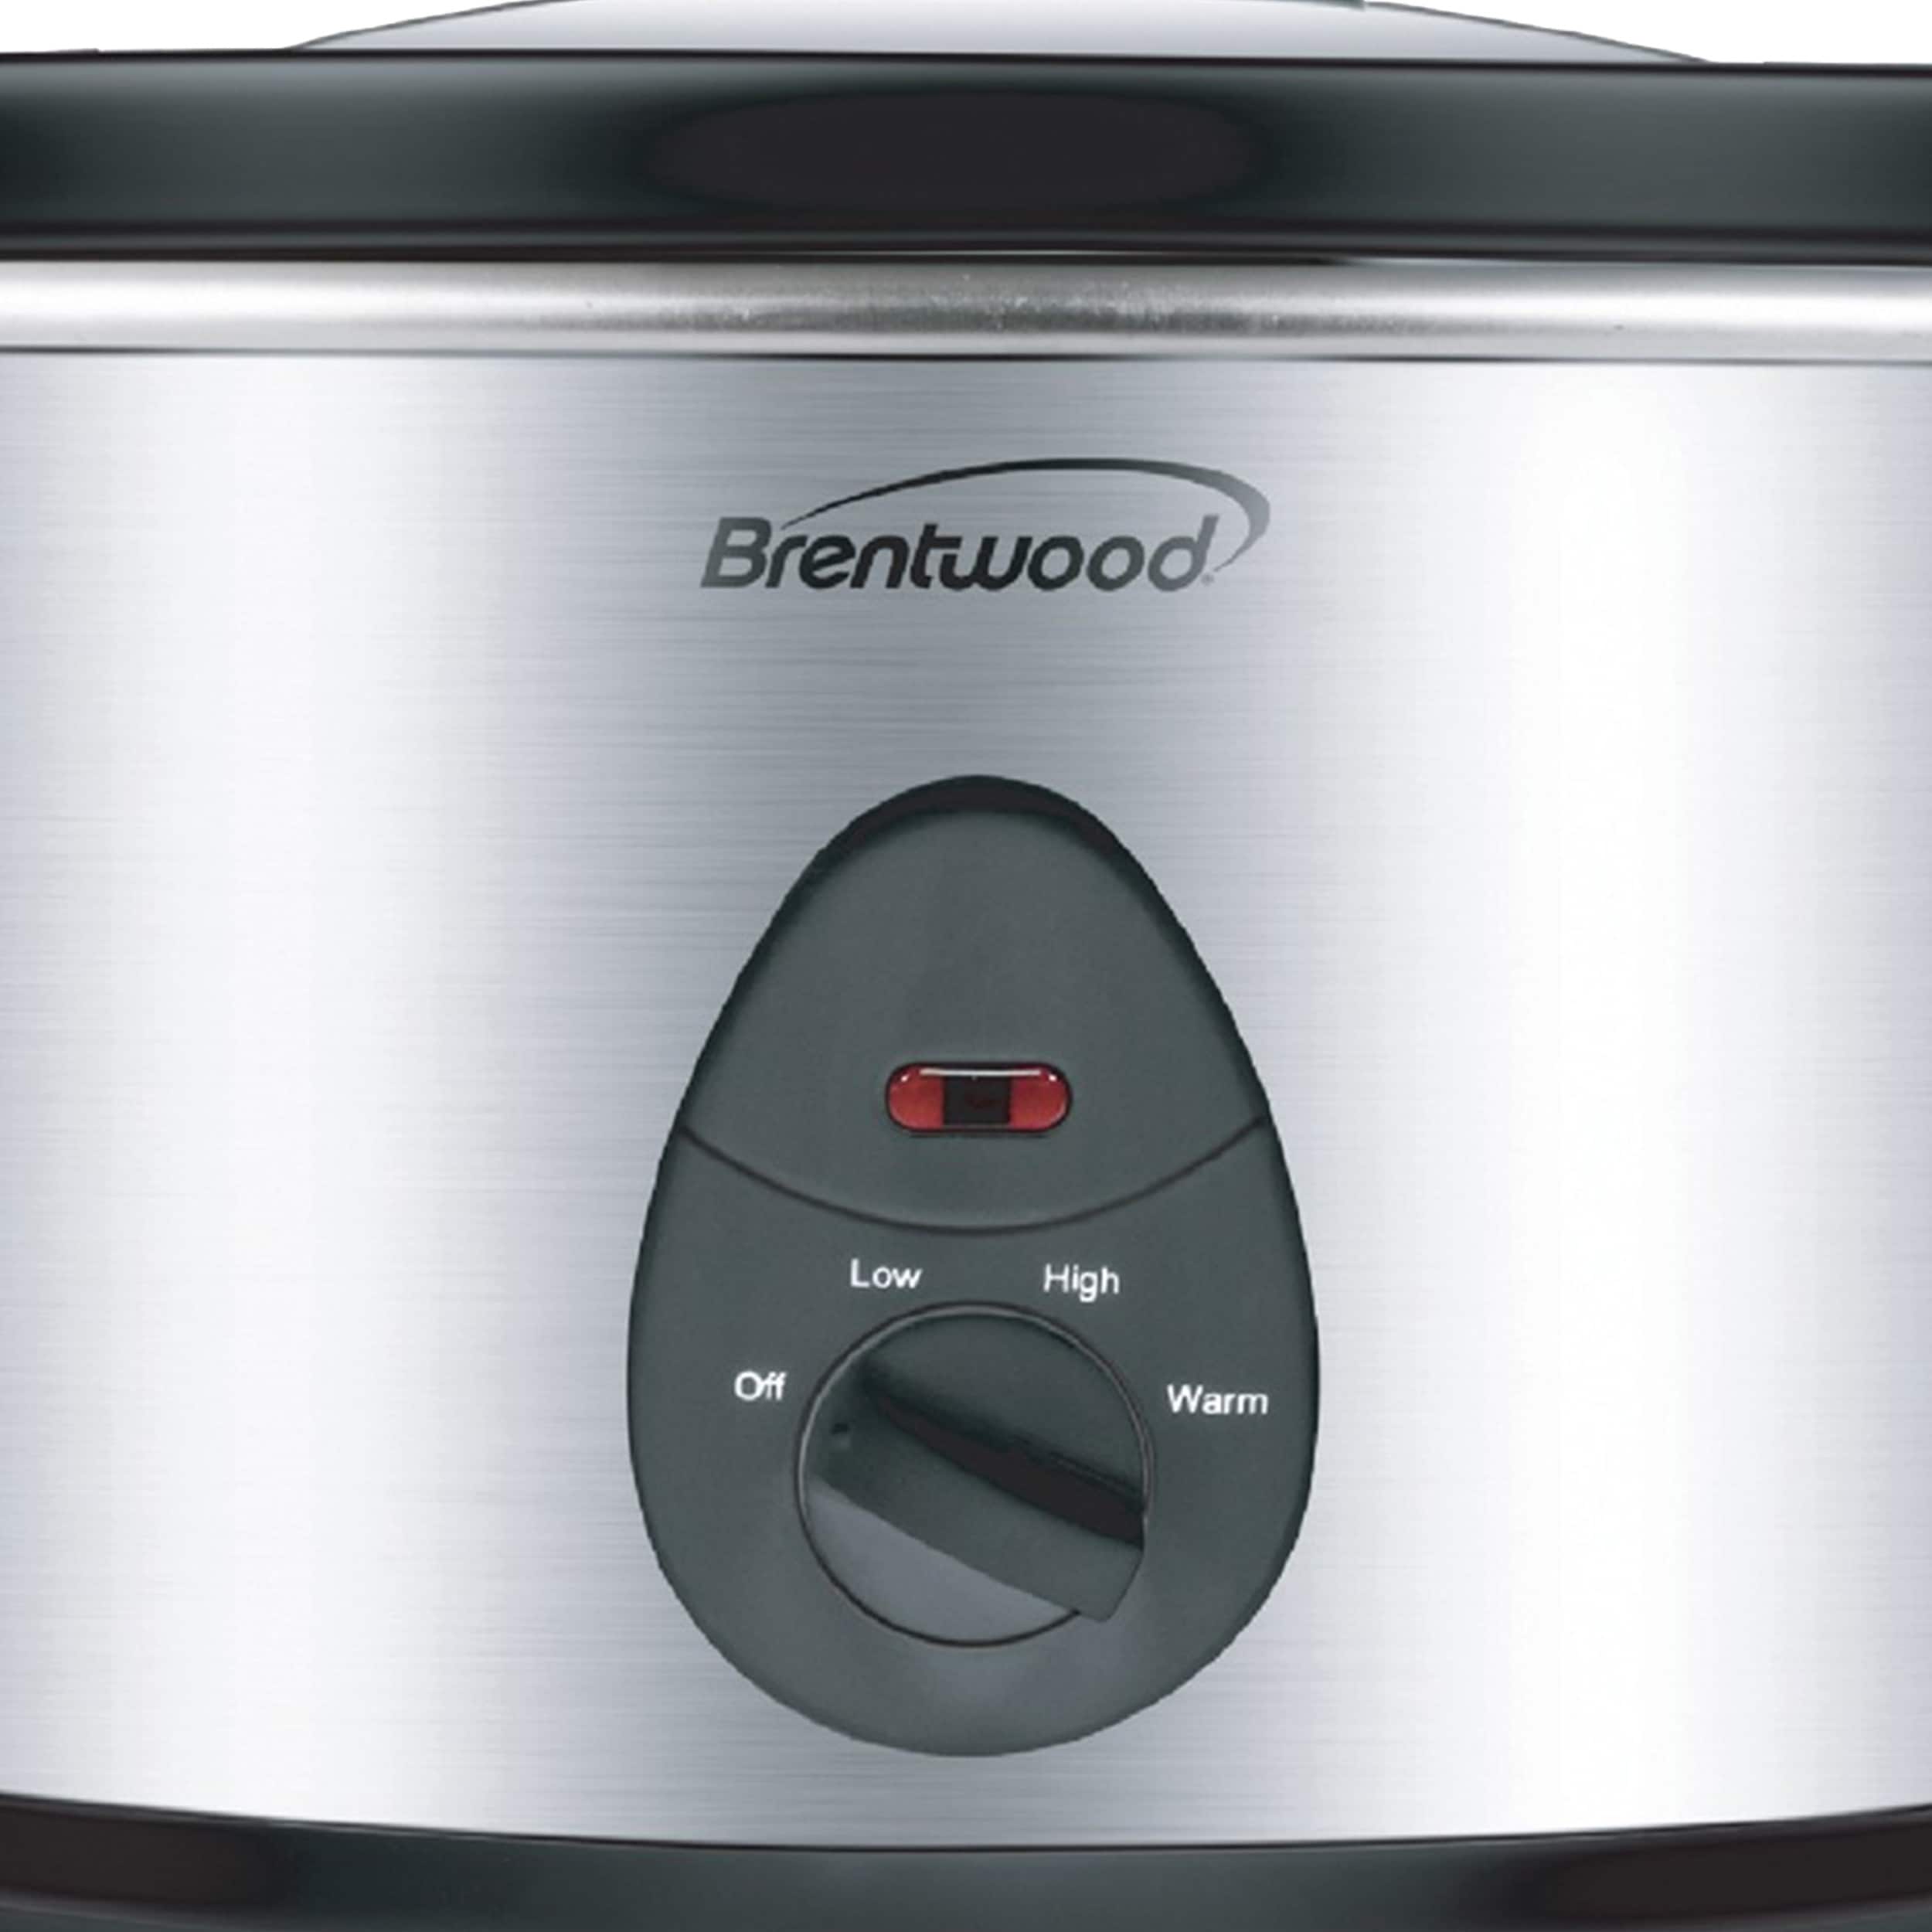 Brentwood Select SC-157W 7 Quart Slow Cooker, White - Brentwood Appliances